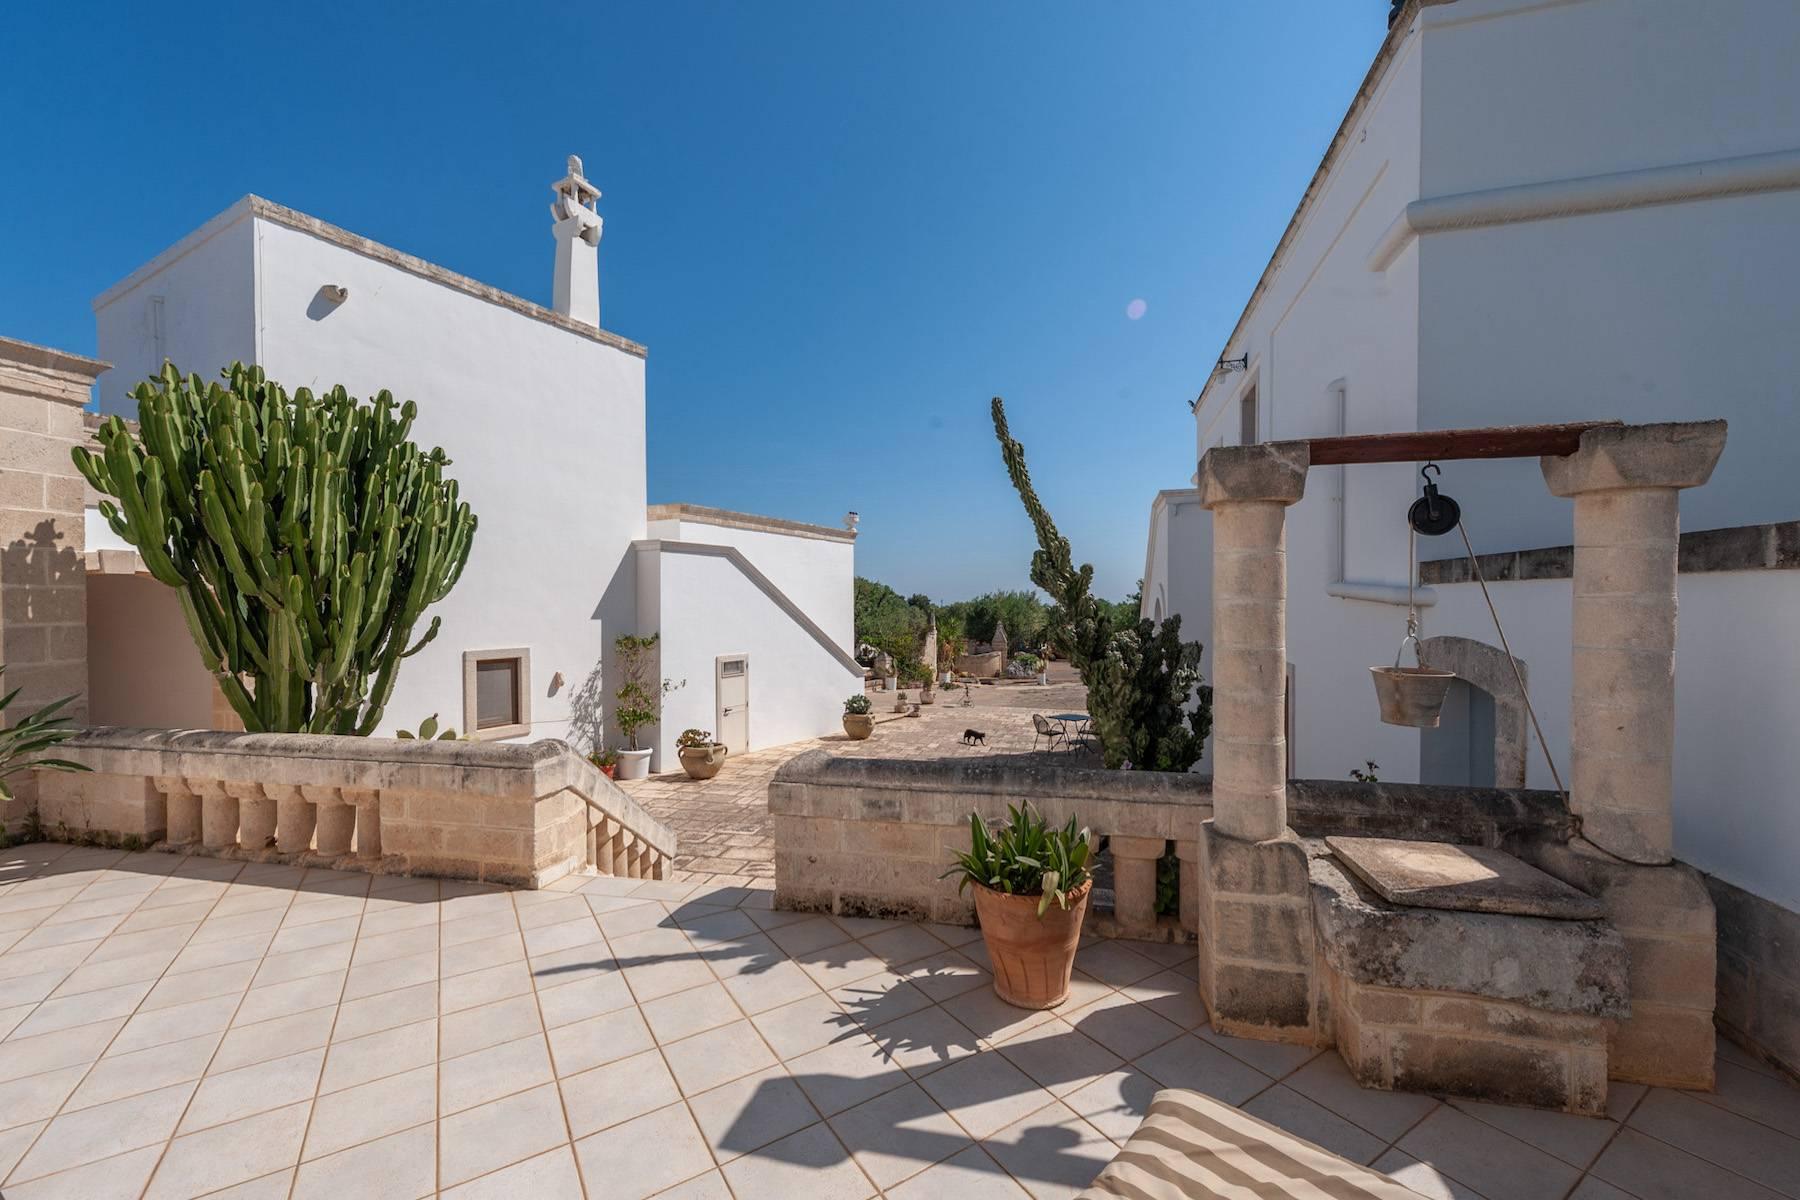 Charming 18th century Masseria surrounded by centuries-old olive trees - 6